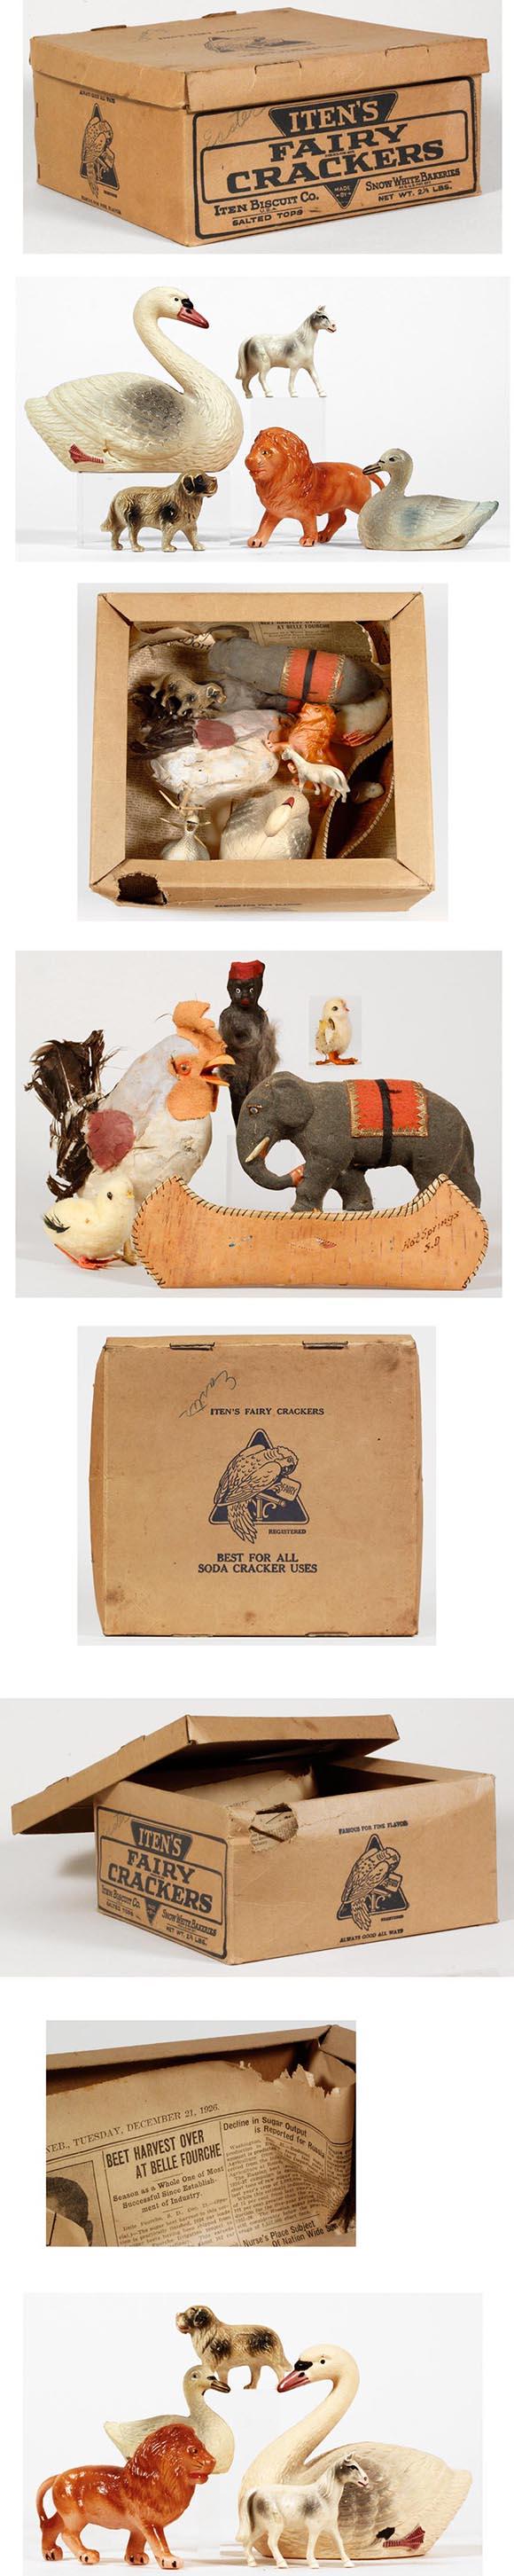 1920's Celluloid & Feathered Critters in Biscuit Box